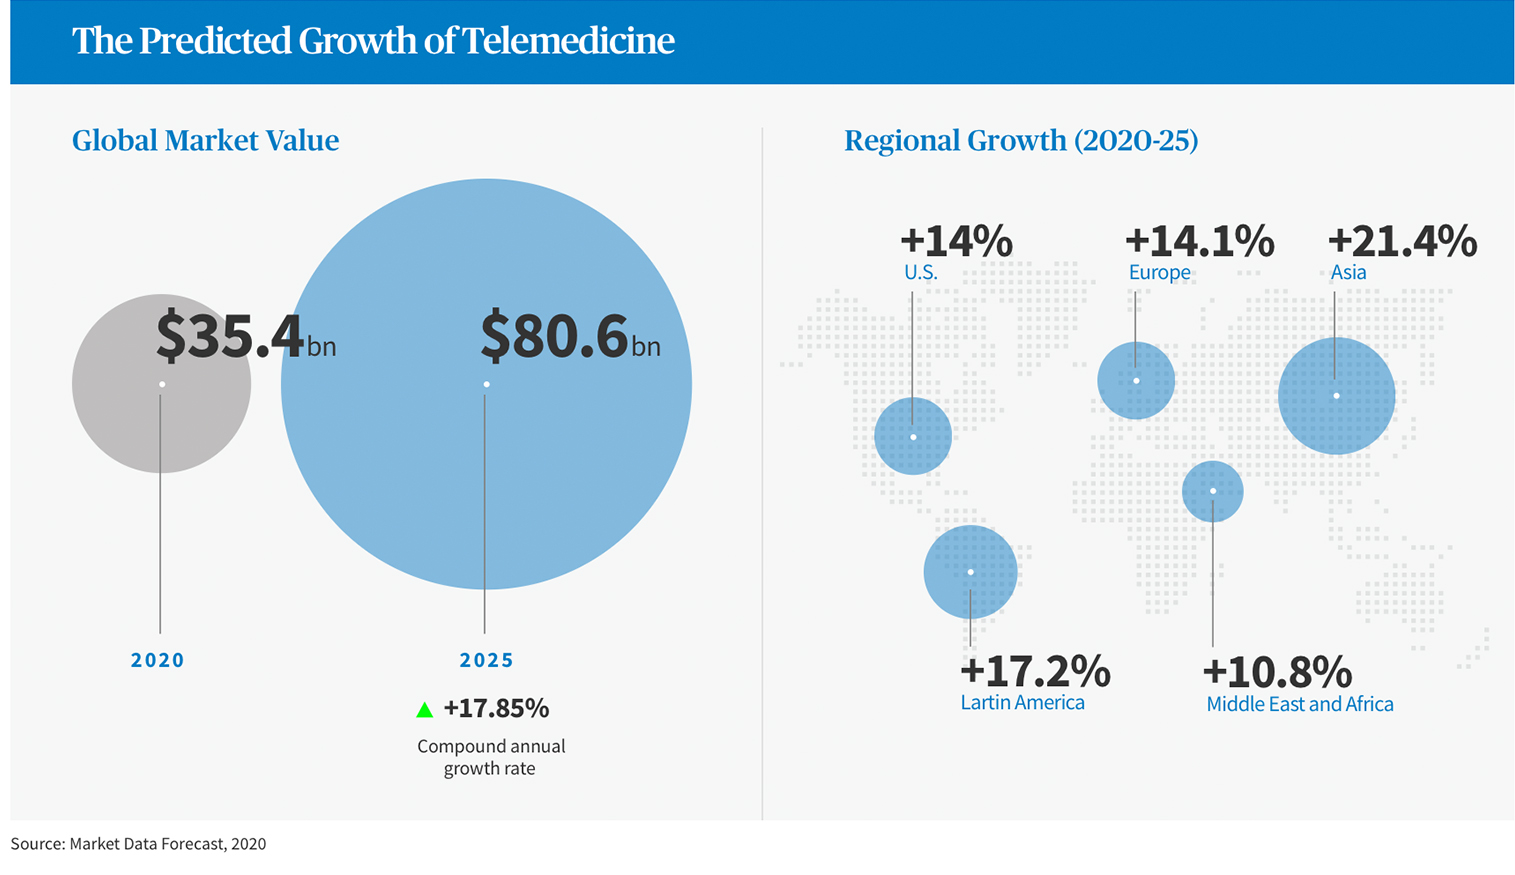 The predicted growth of Telemedicine